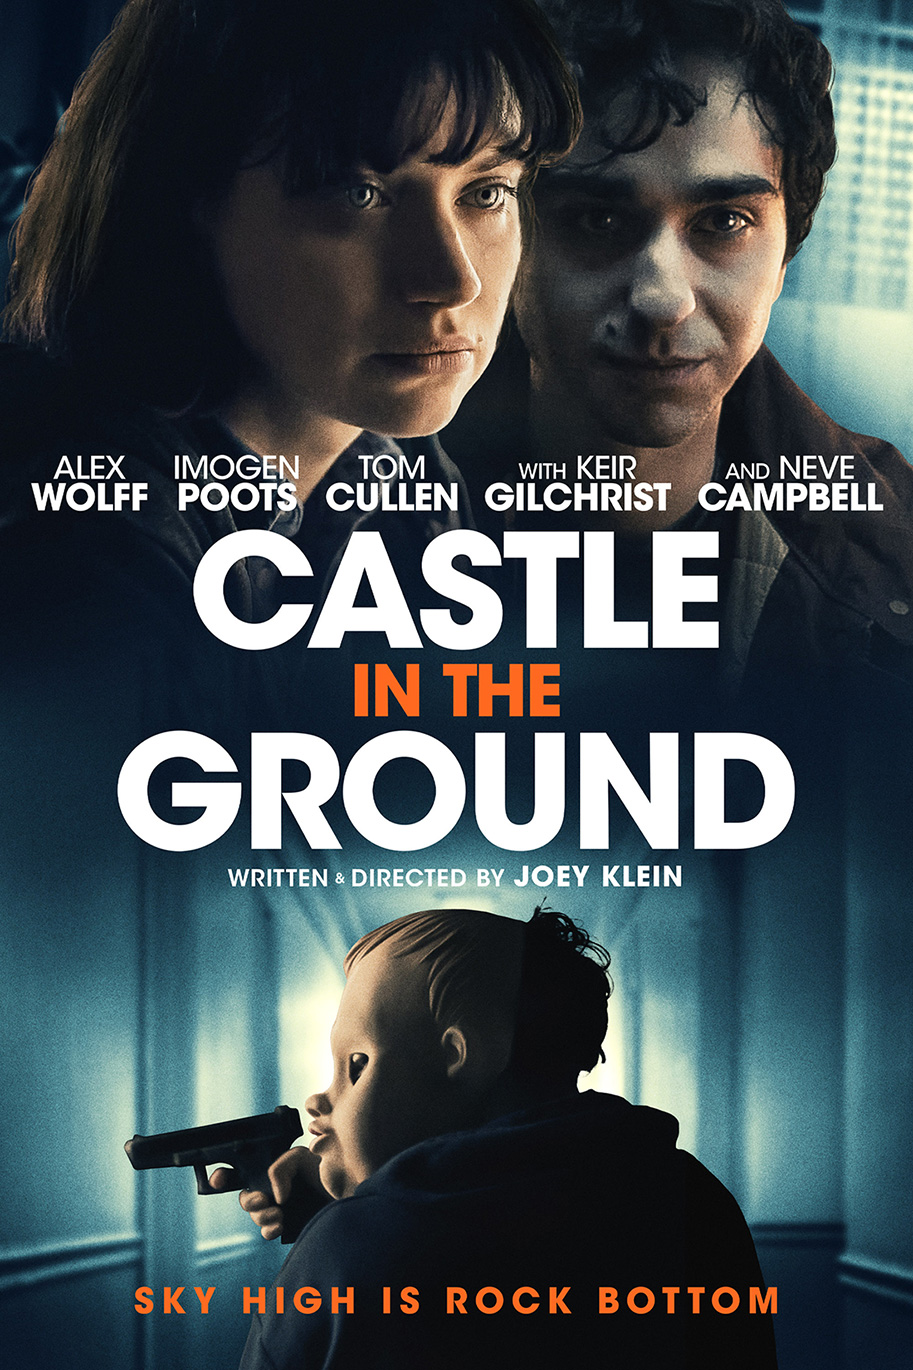 Castle in the Ground, Gravitas Ventures, Alex Wolff, Imogen Poots, Neve Cambell